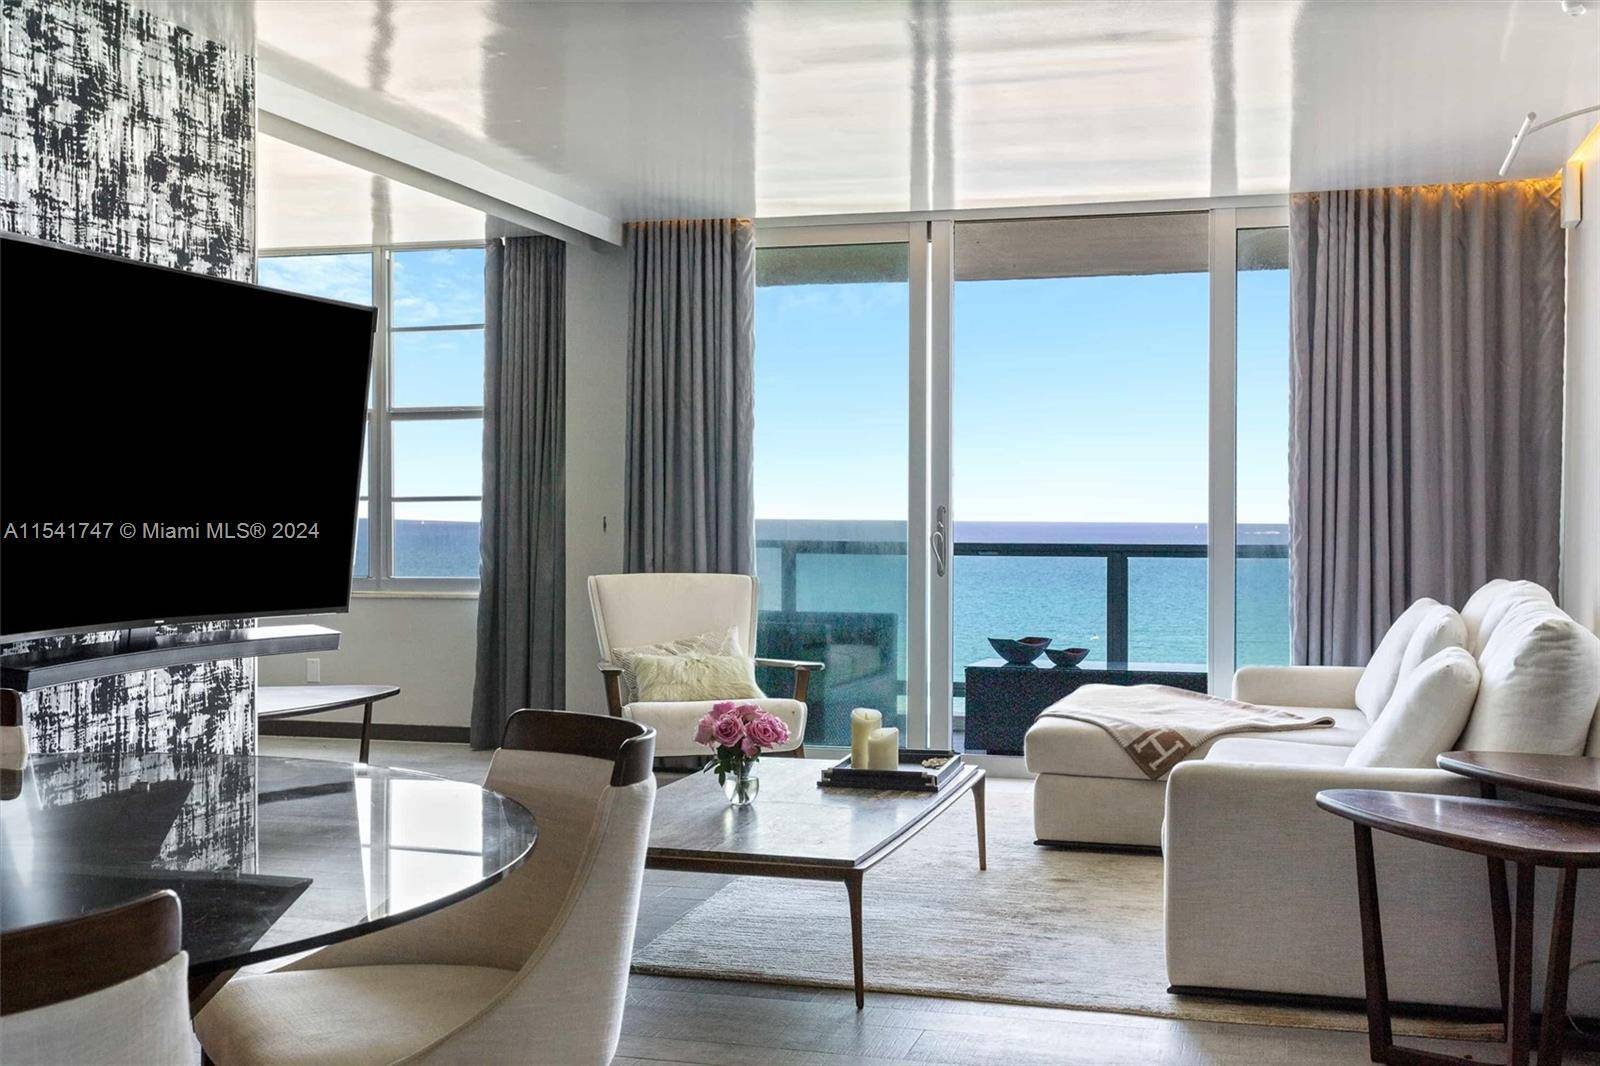 The best unit in the building has a breathtaking direct ocean view.